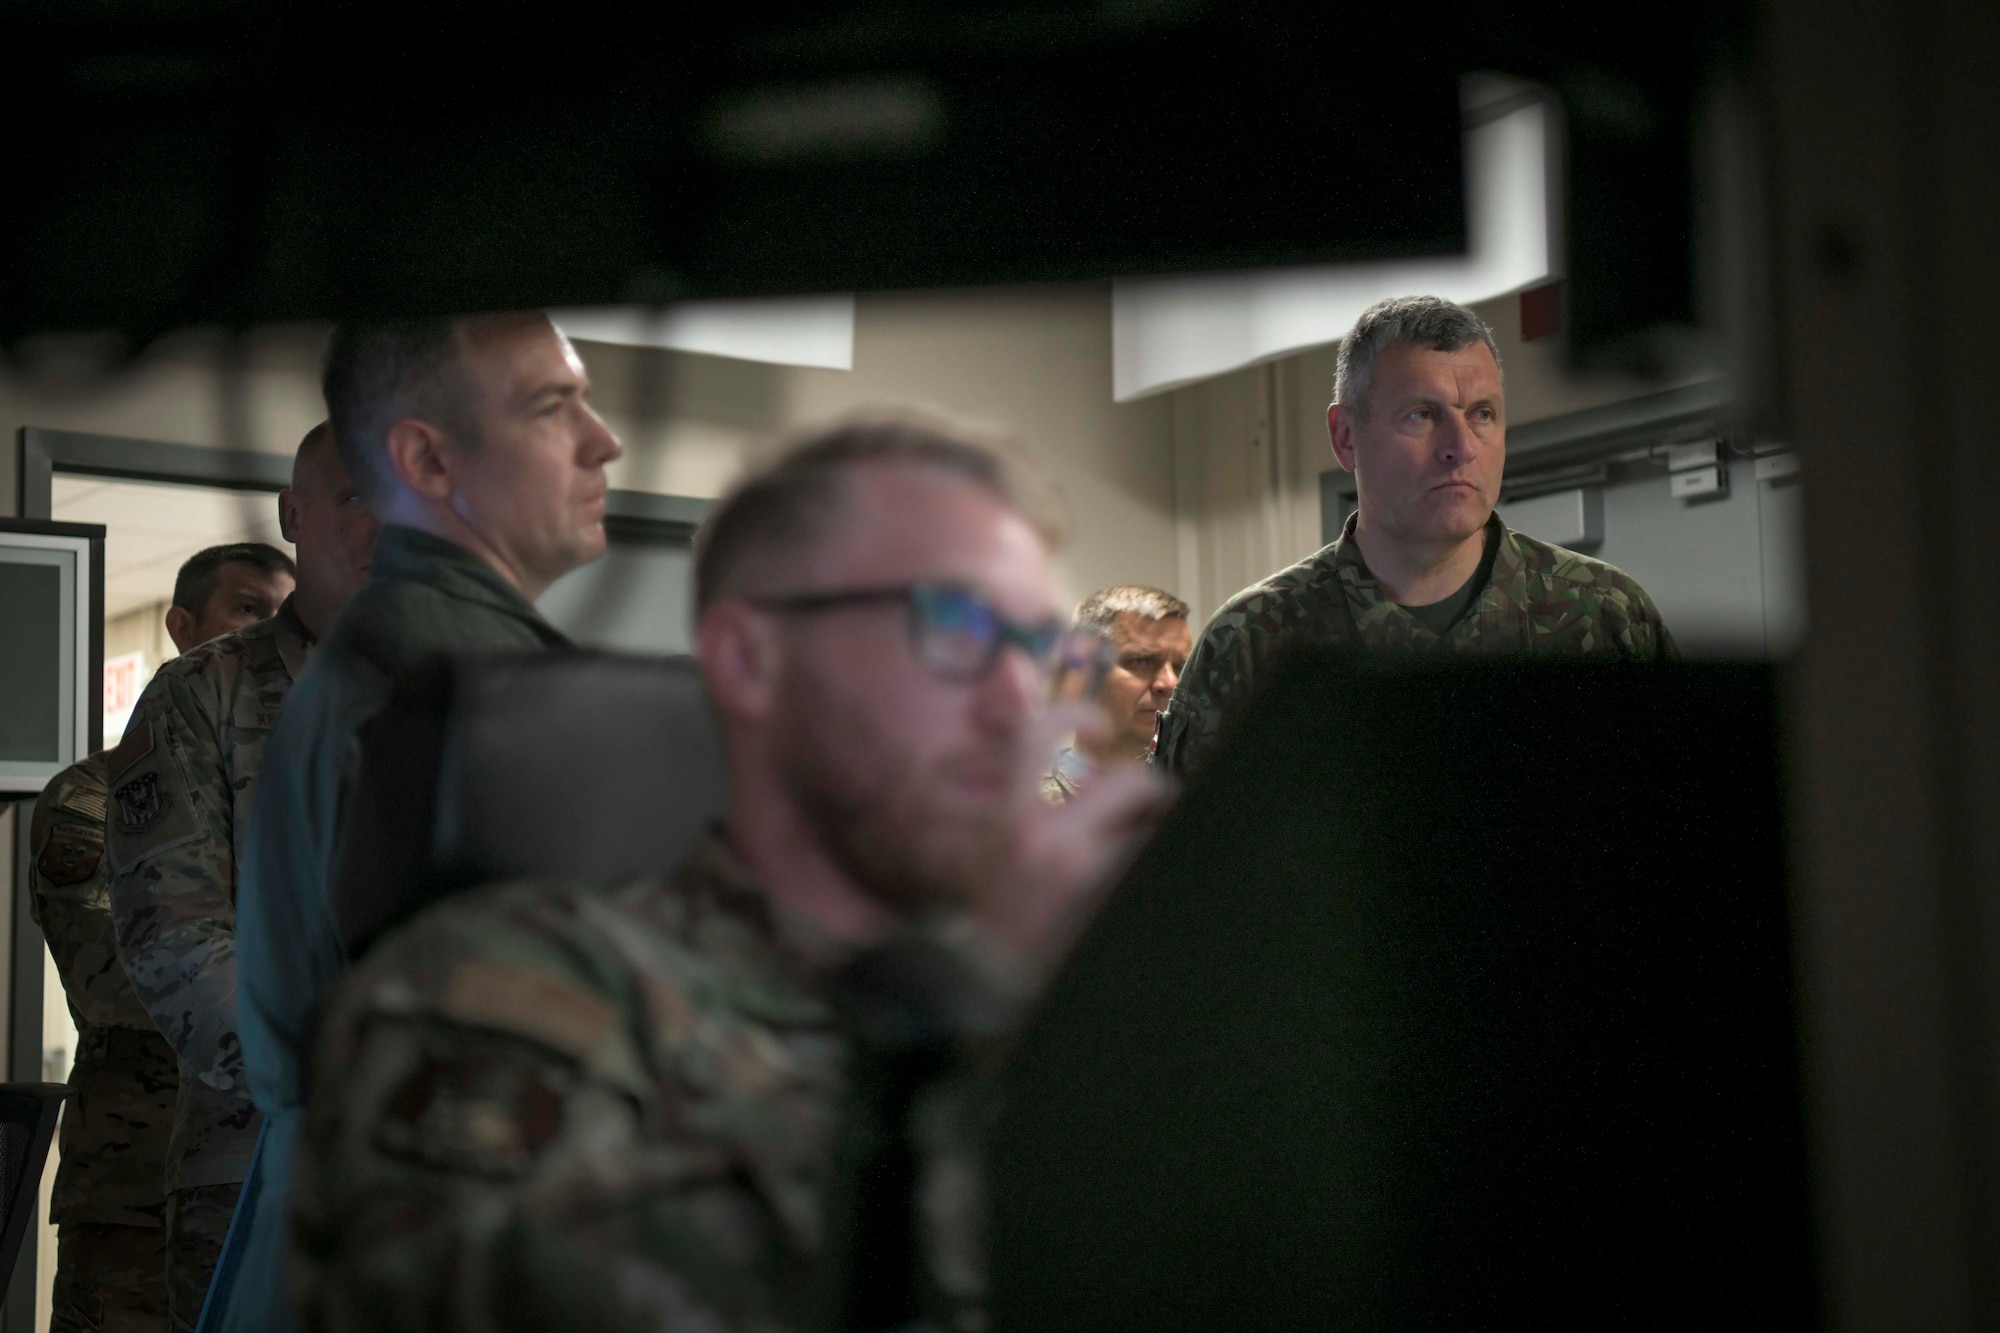 Lt. Gen. Leonīds Kalniņš, Latvia chief of defense, observes the MQ-9 Reaper flight simulator during a visit to the Battle Creek Air National Guard Base, Michigan, Aug 2, 2021. The purpose of the visit was to observe the missions at the base to maximize multi-national training opportunities through the Michigan-Latvian partnership.